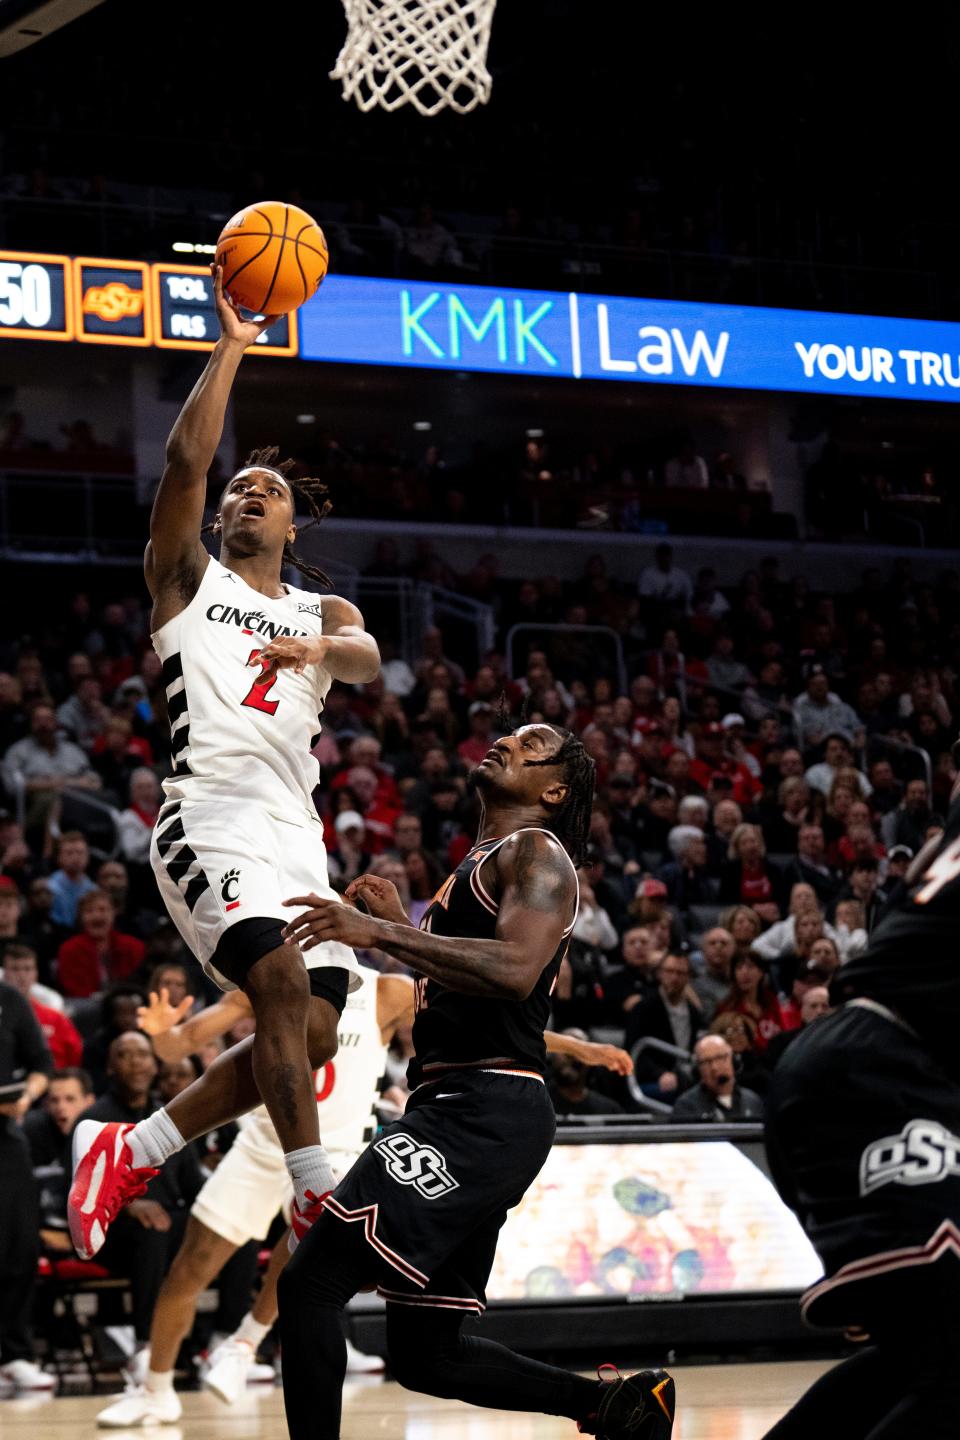 UC guard Jizzle James had 10 points against Oklahoma State. Wes Miller wants to see improved defense from the freshman guard.